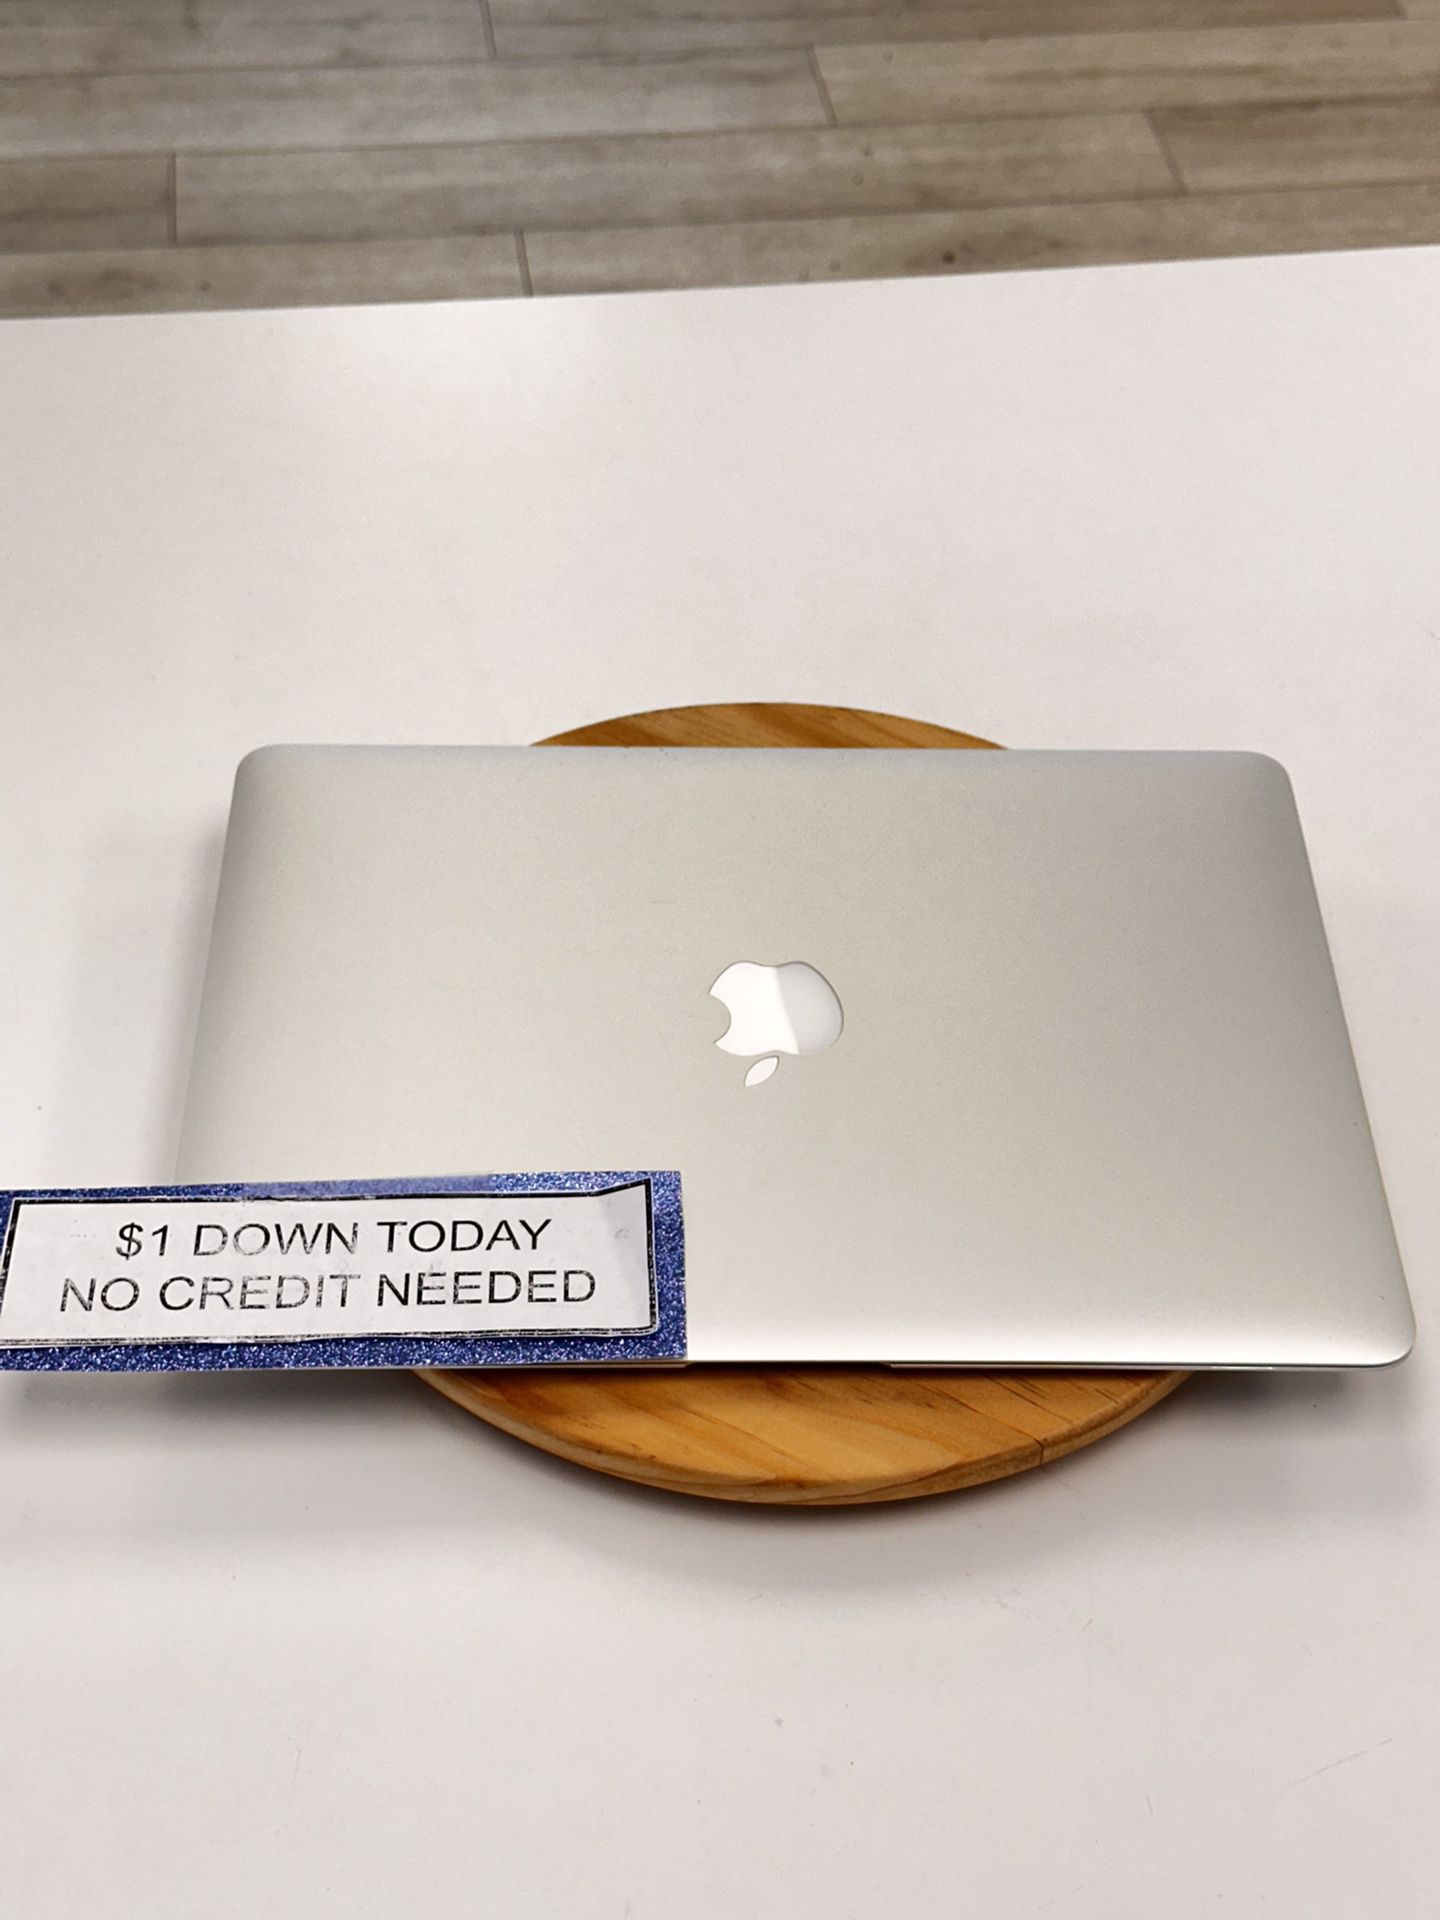 Apple MacBook Air 13 Inch Laptop - Pay $1 Today to Take it Home and Pay the Rest Later!